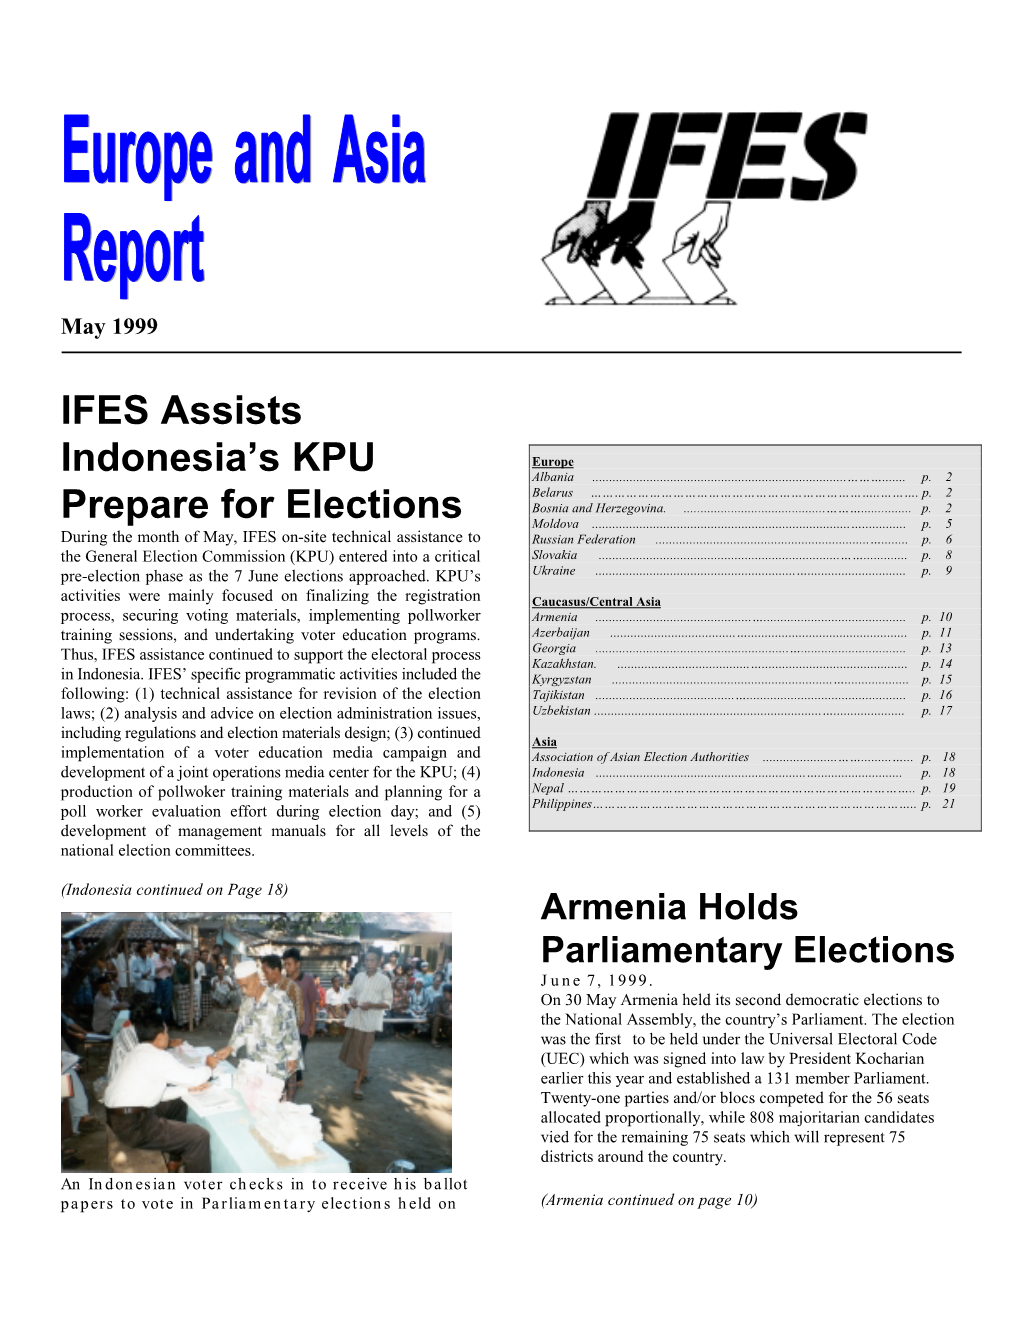 IFES Assists Indonesia's KPU Prepare for Elections